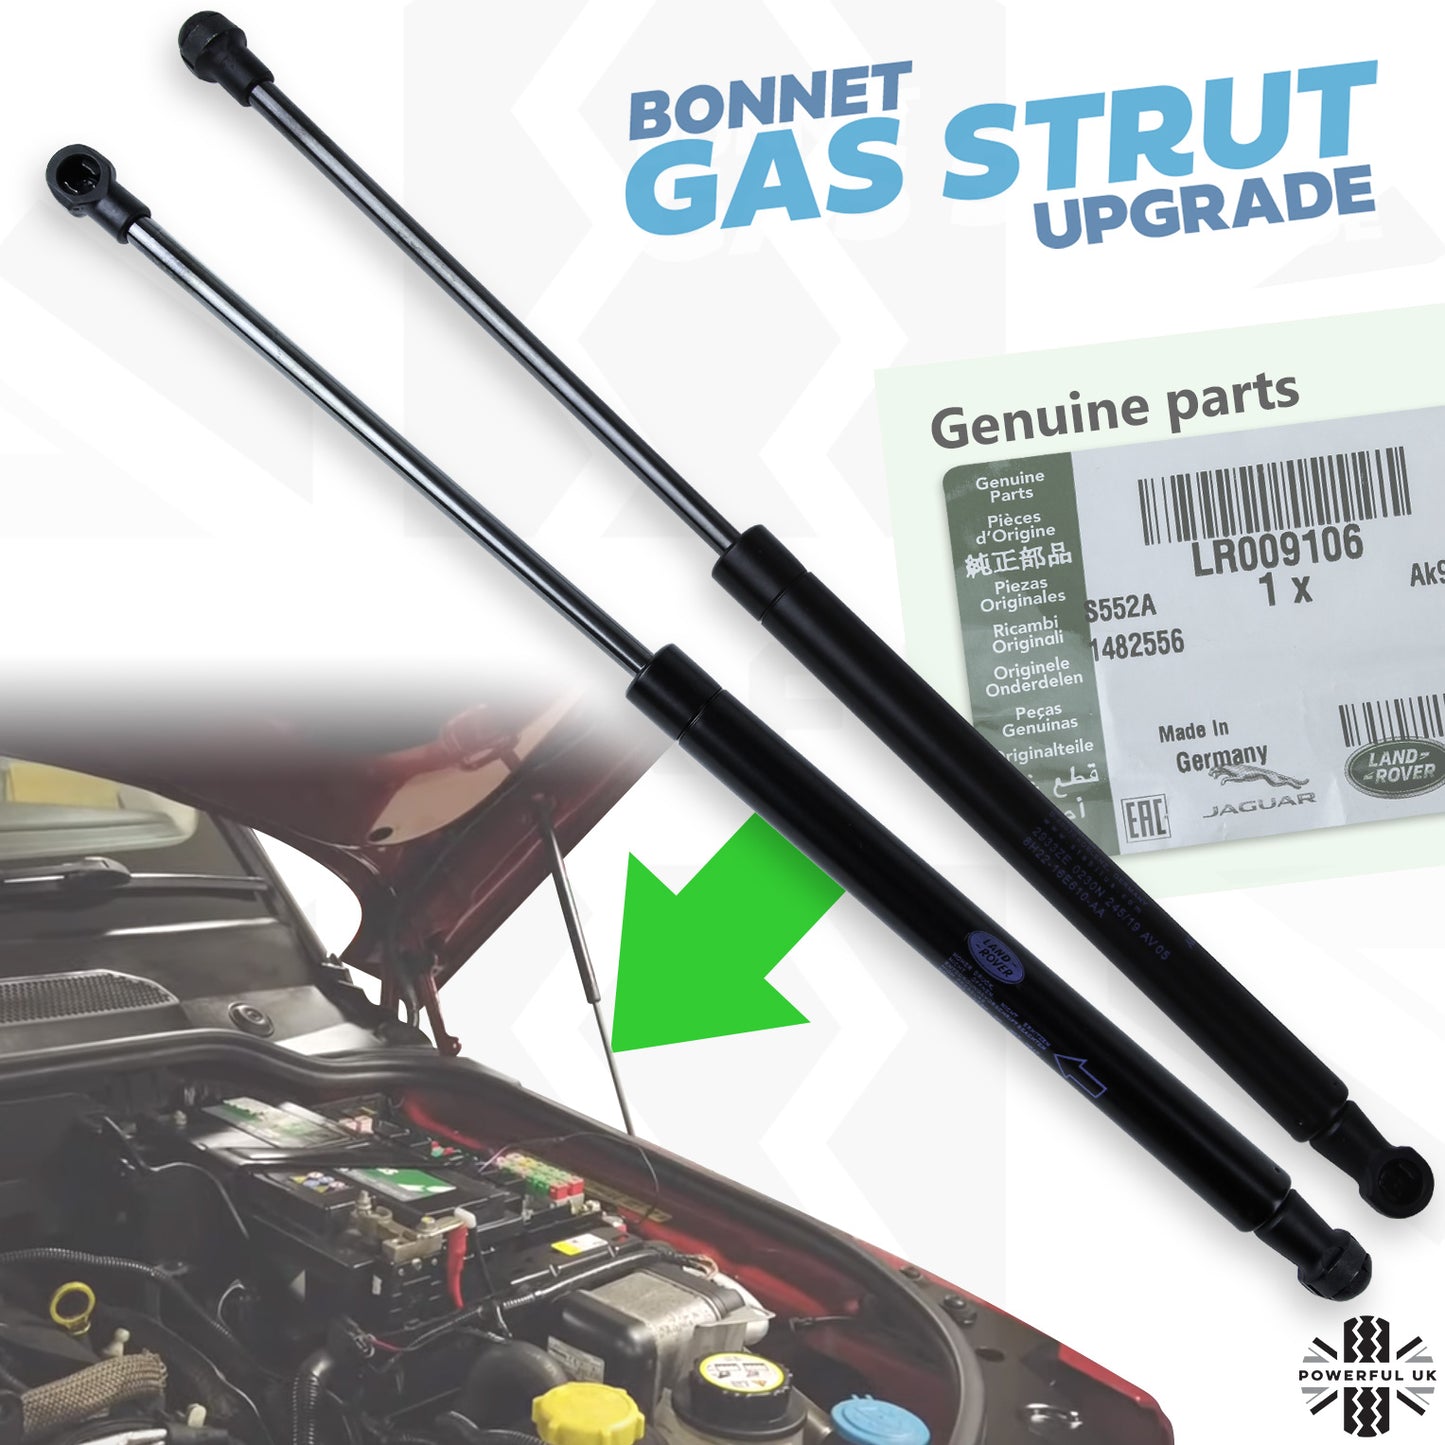 Bonnet Gas Struts for Land Rover Discovery 3 & 4 - Genuine - PAIR